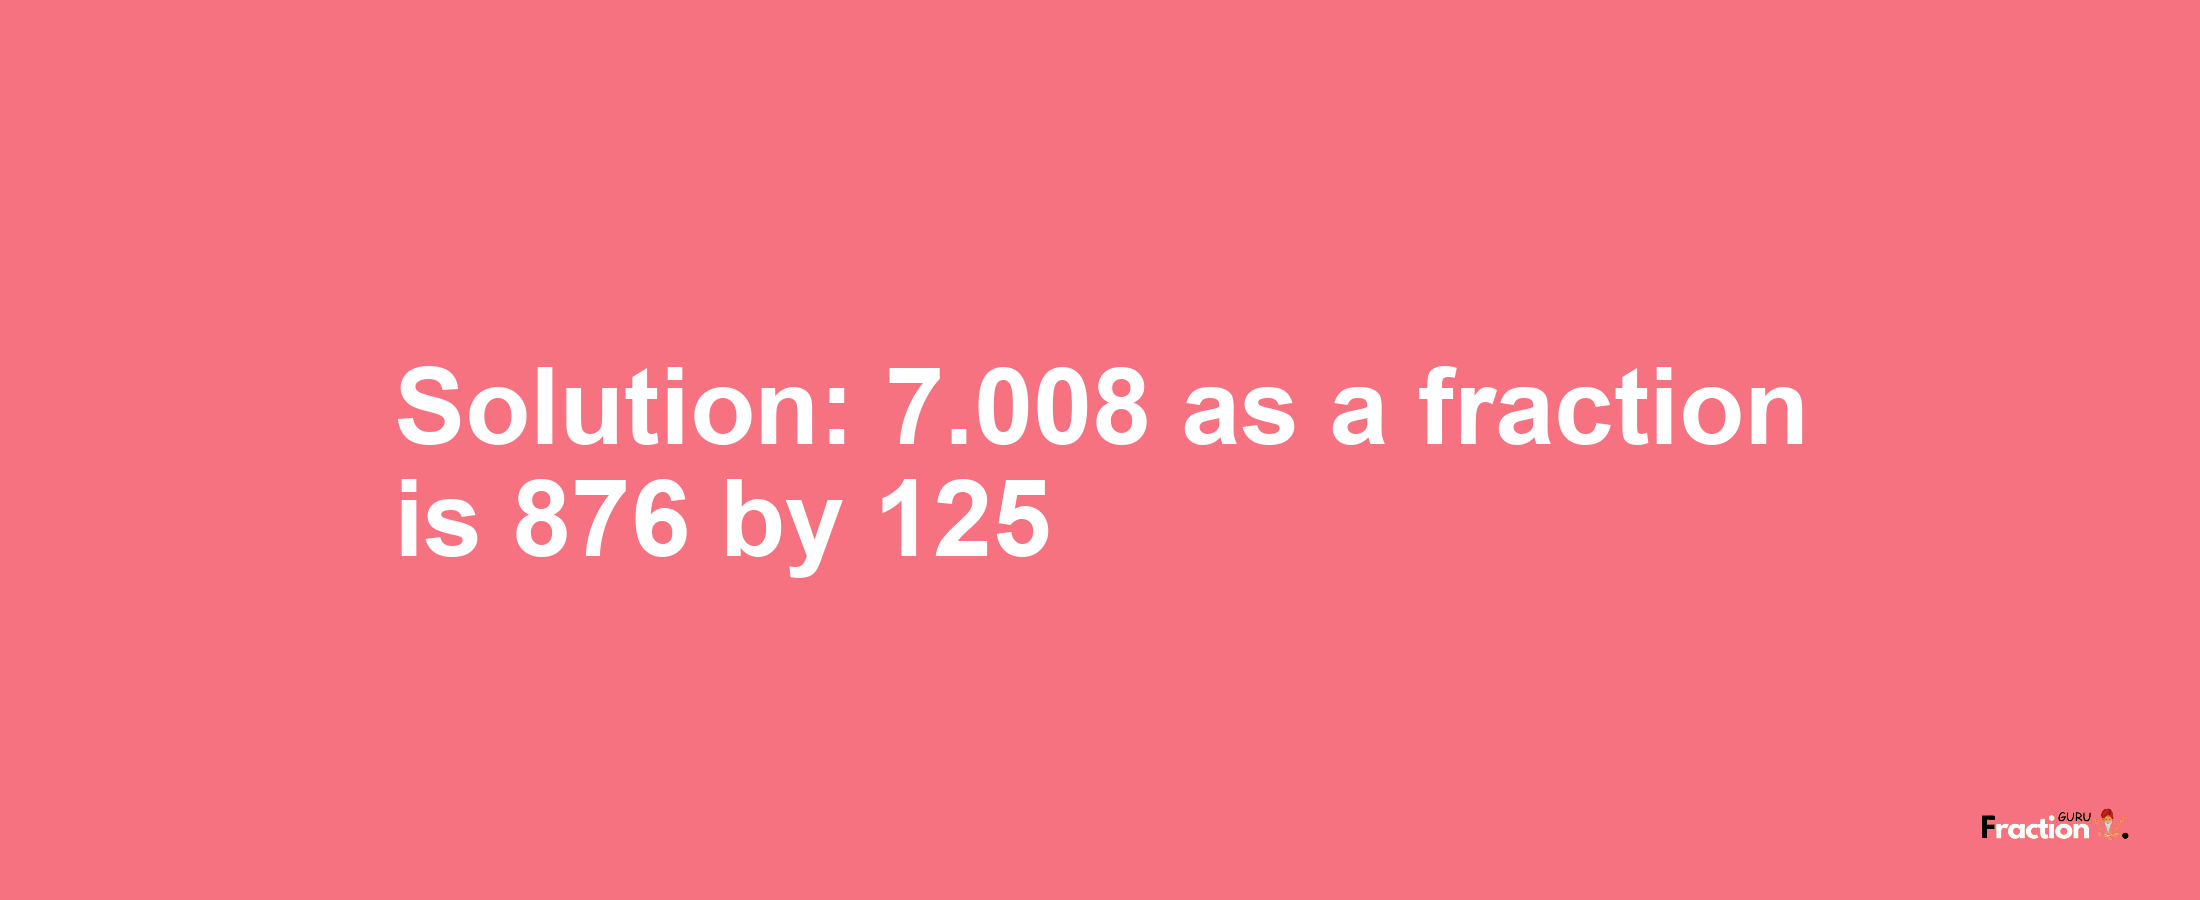 Solution:7.008 as a fraction is 876/125